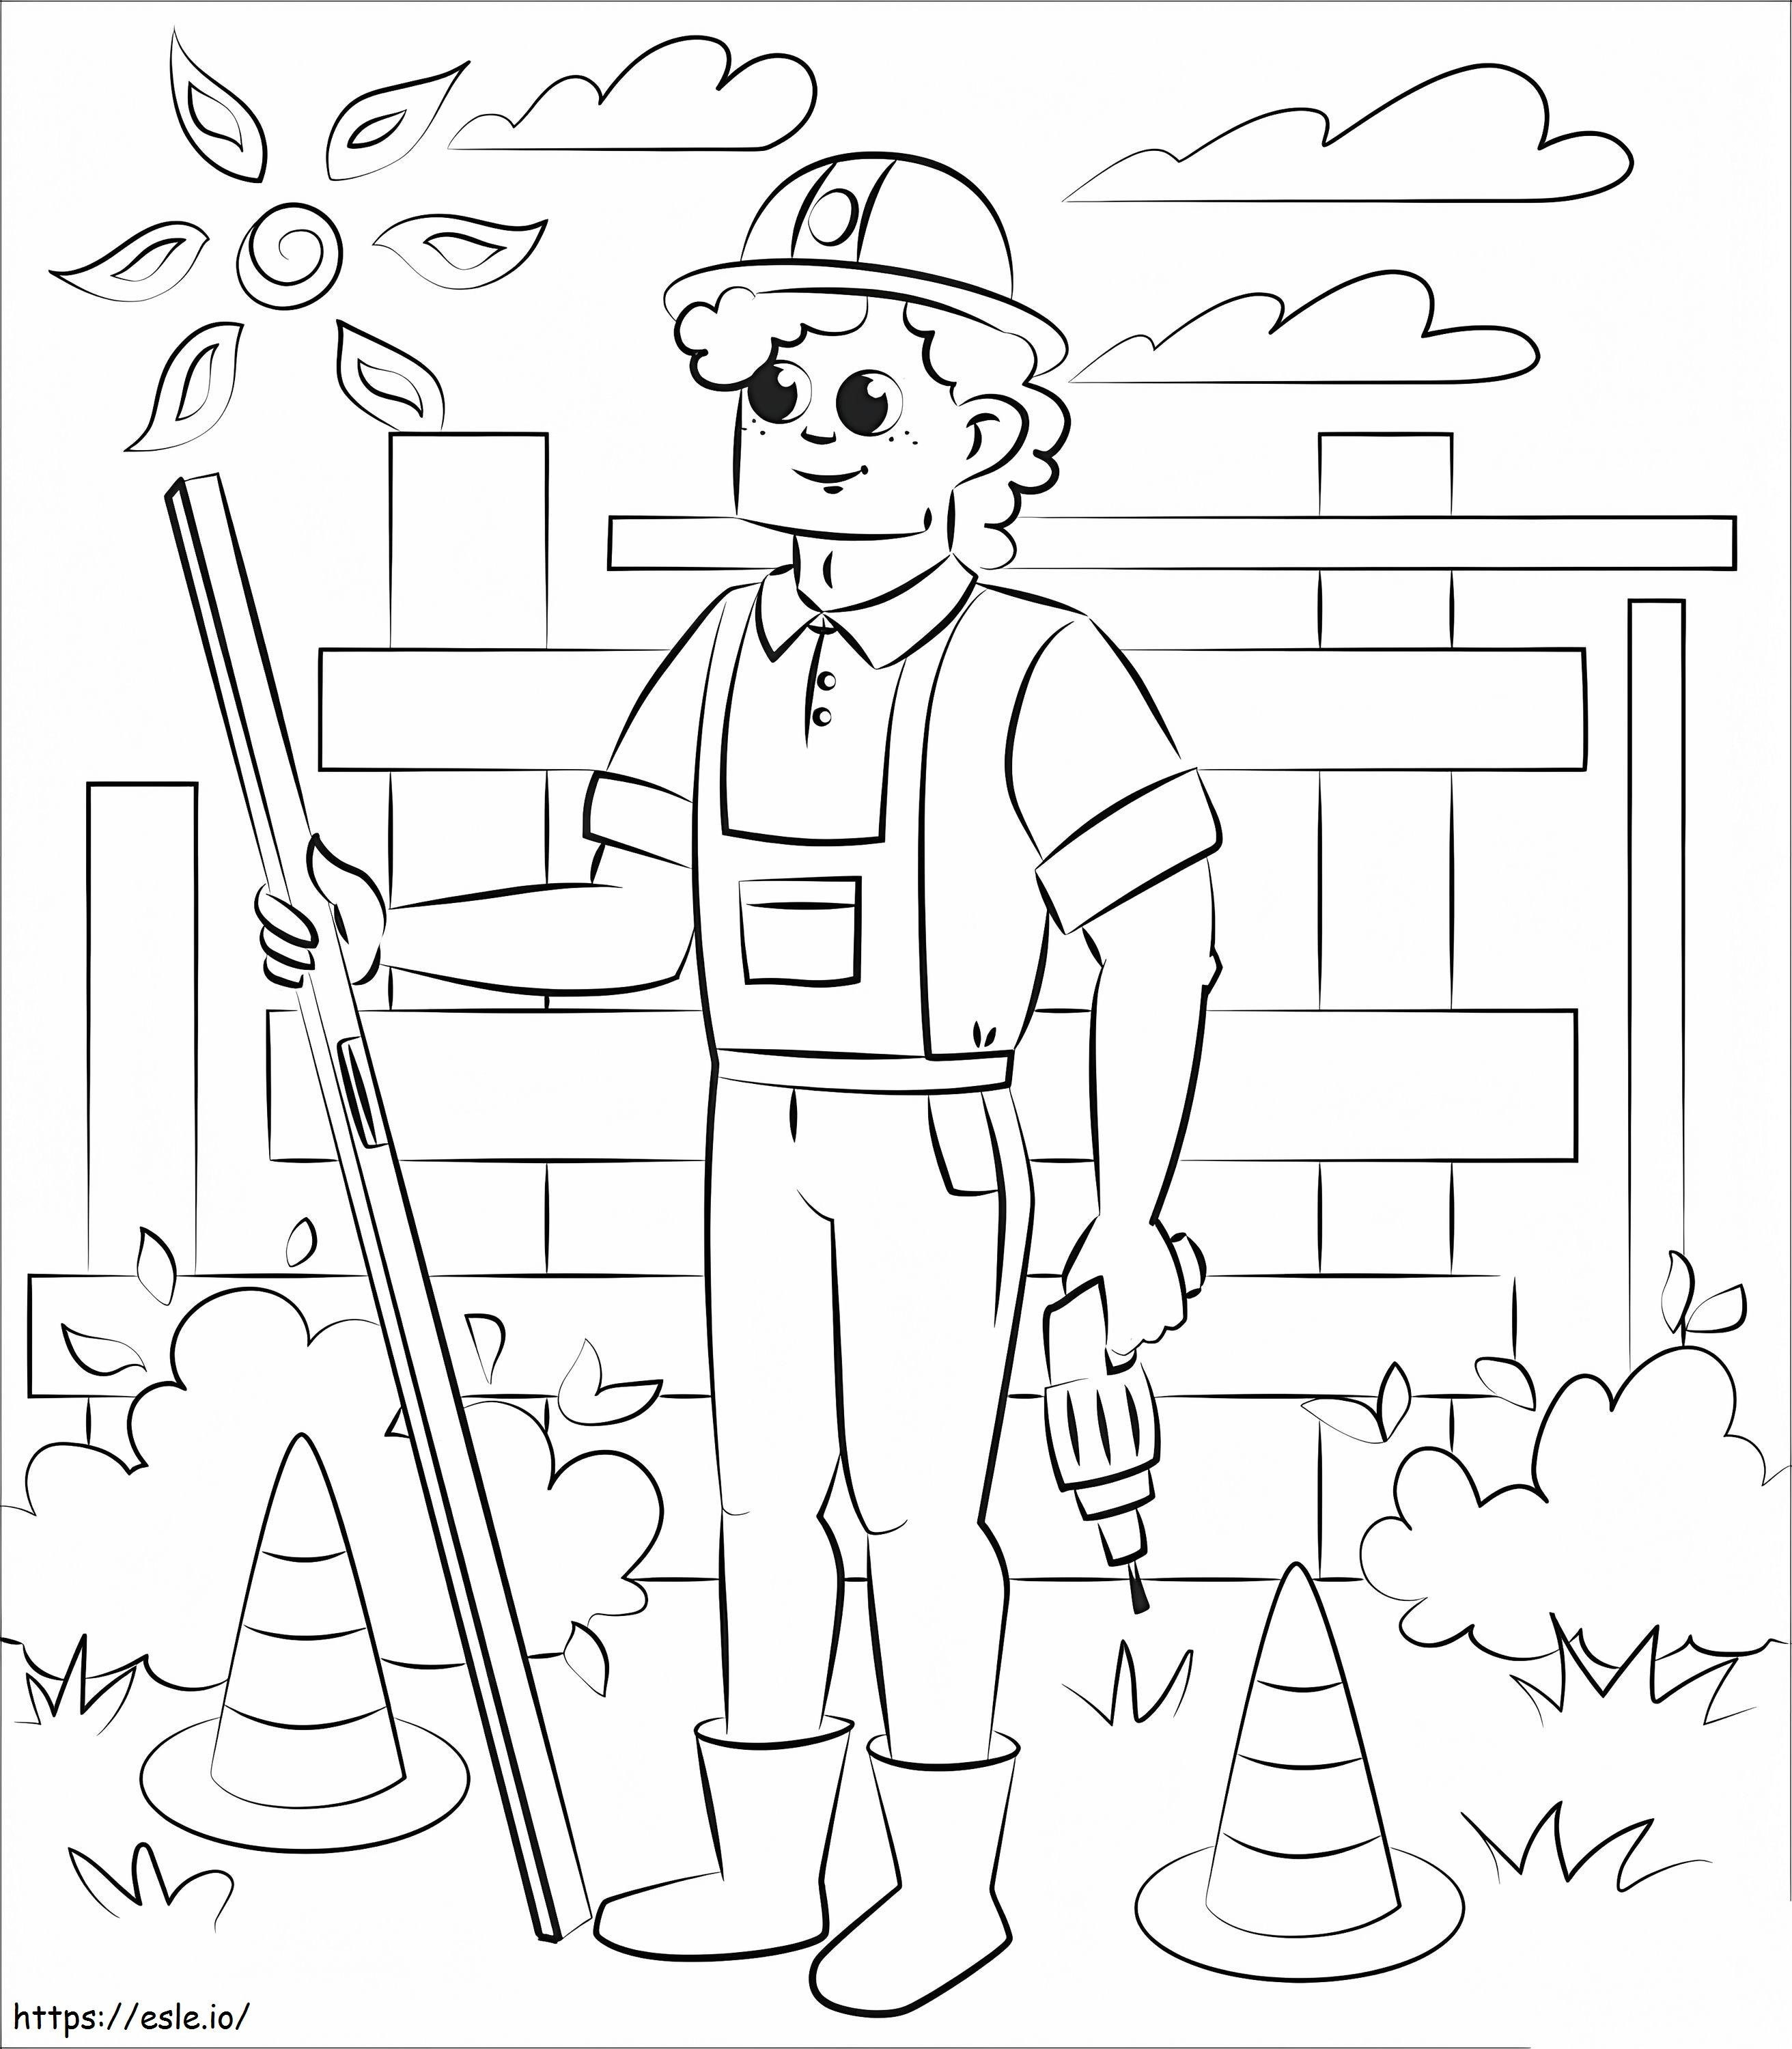 Cool Construction Worker coloring page